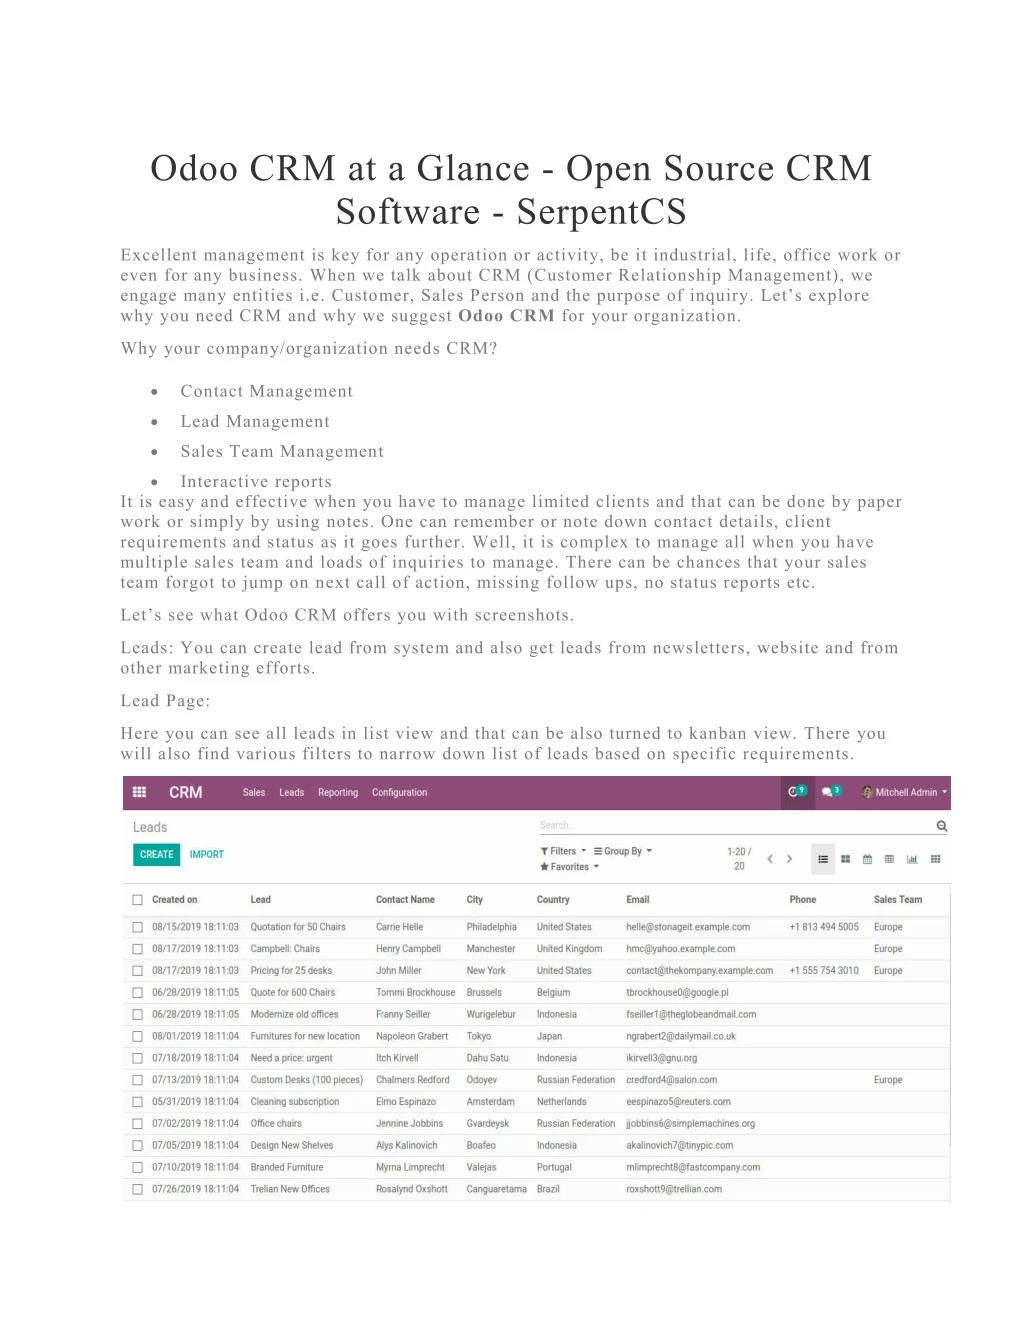 odoo crm at a glance software software serpentcs